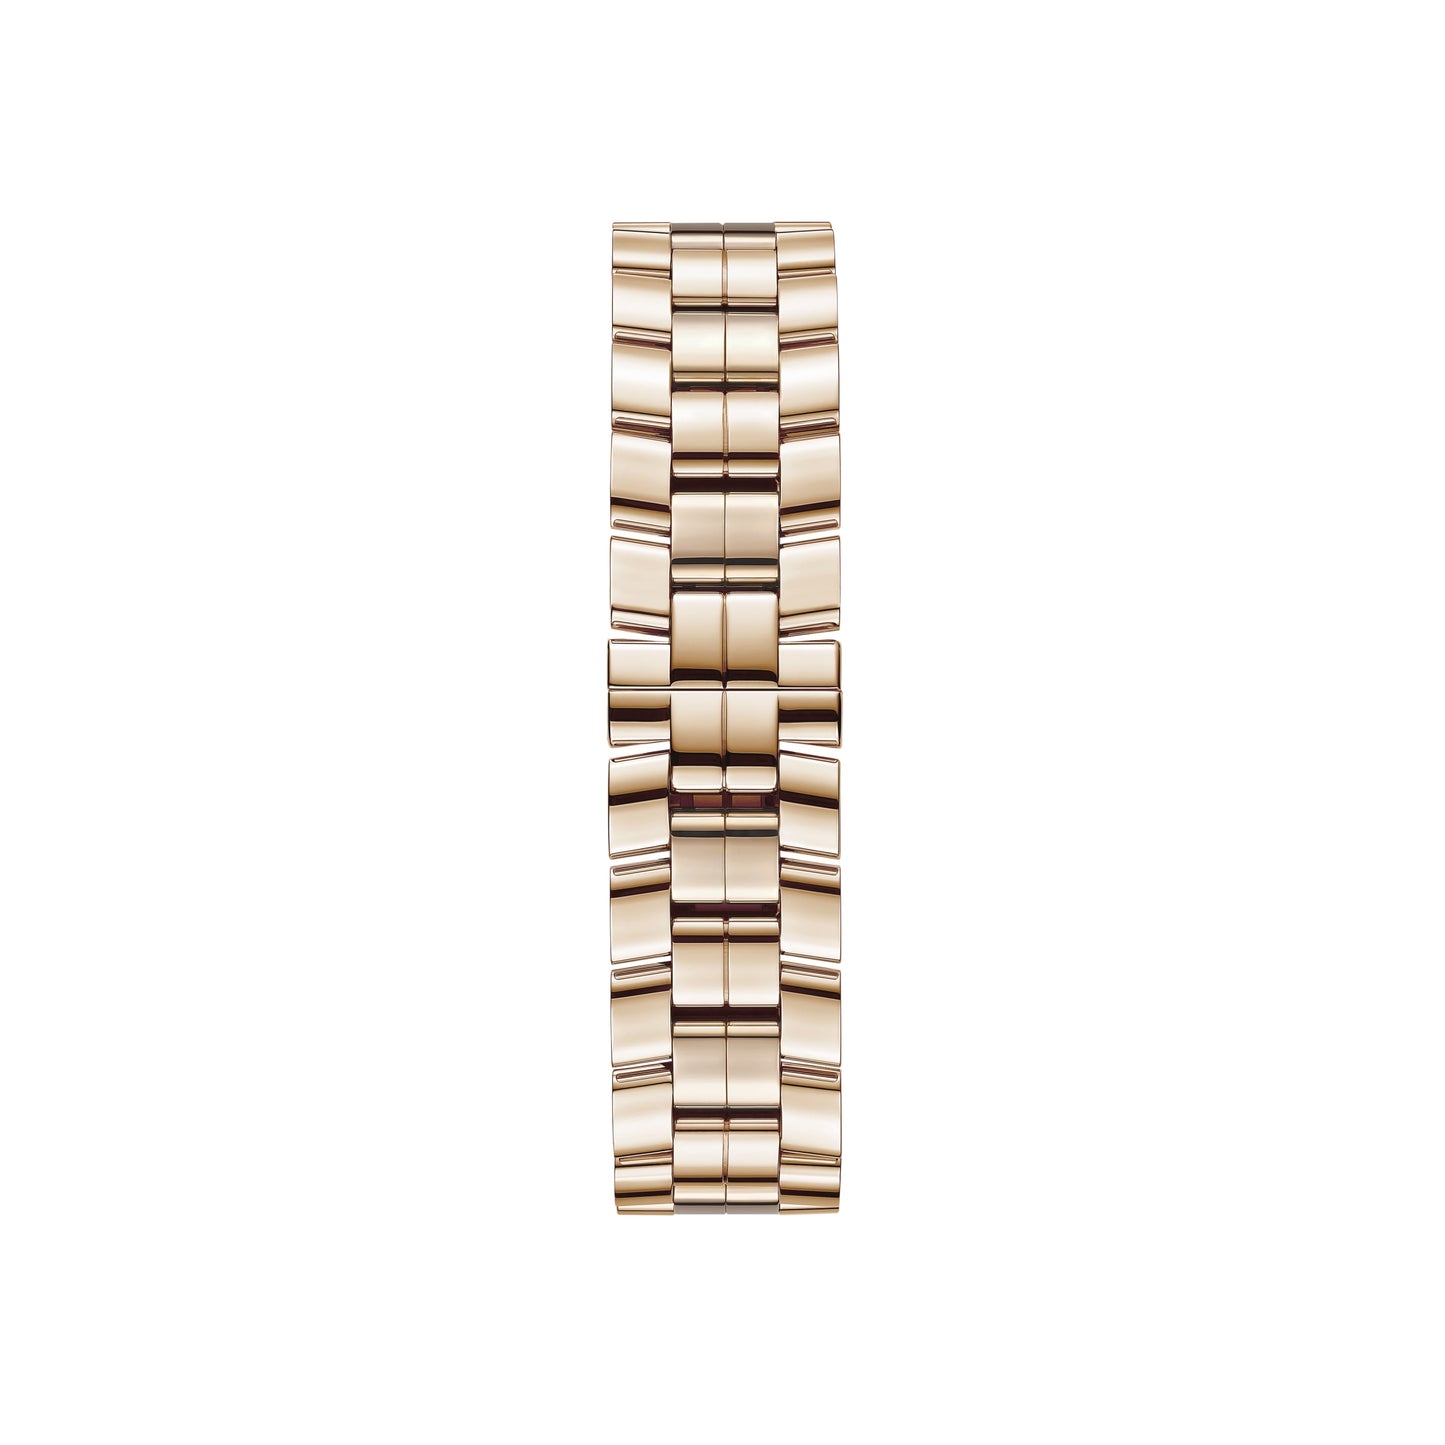 HAPPY SPORT 33 MM, AUTOMATIC, ETHICAL ROSE GOLD, DIAMONDS 275378-5004